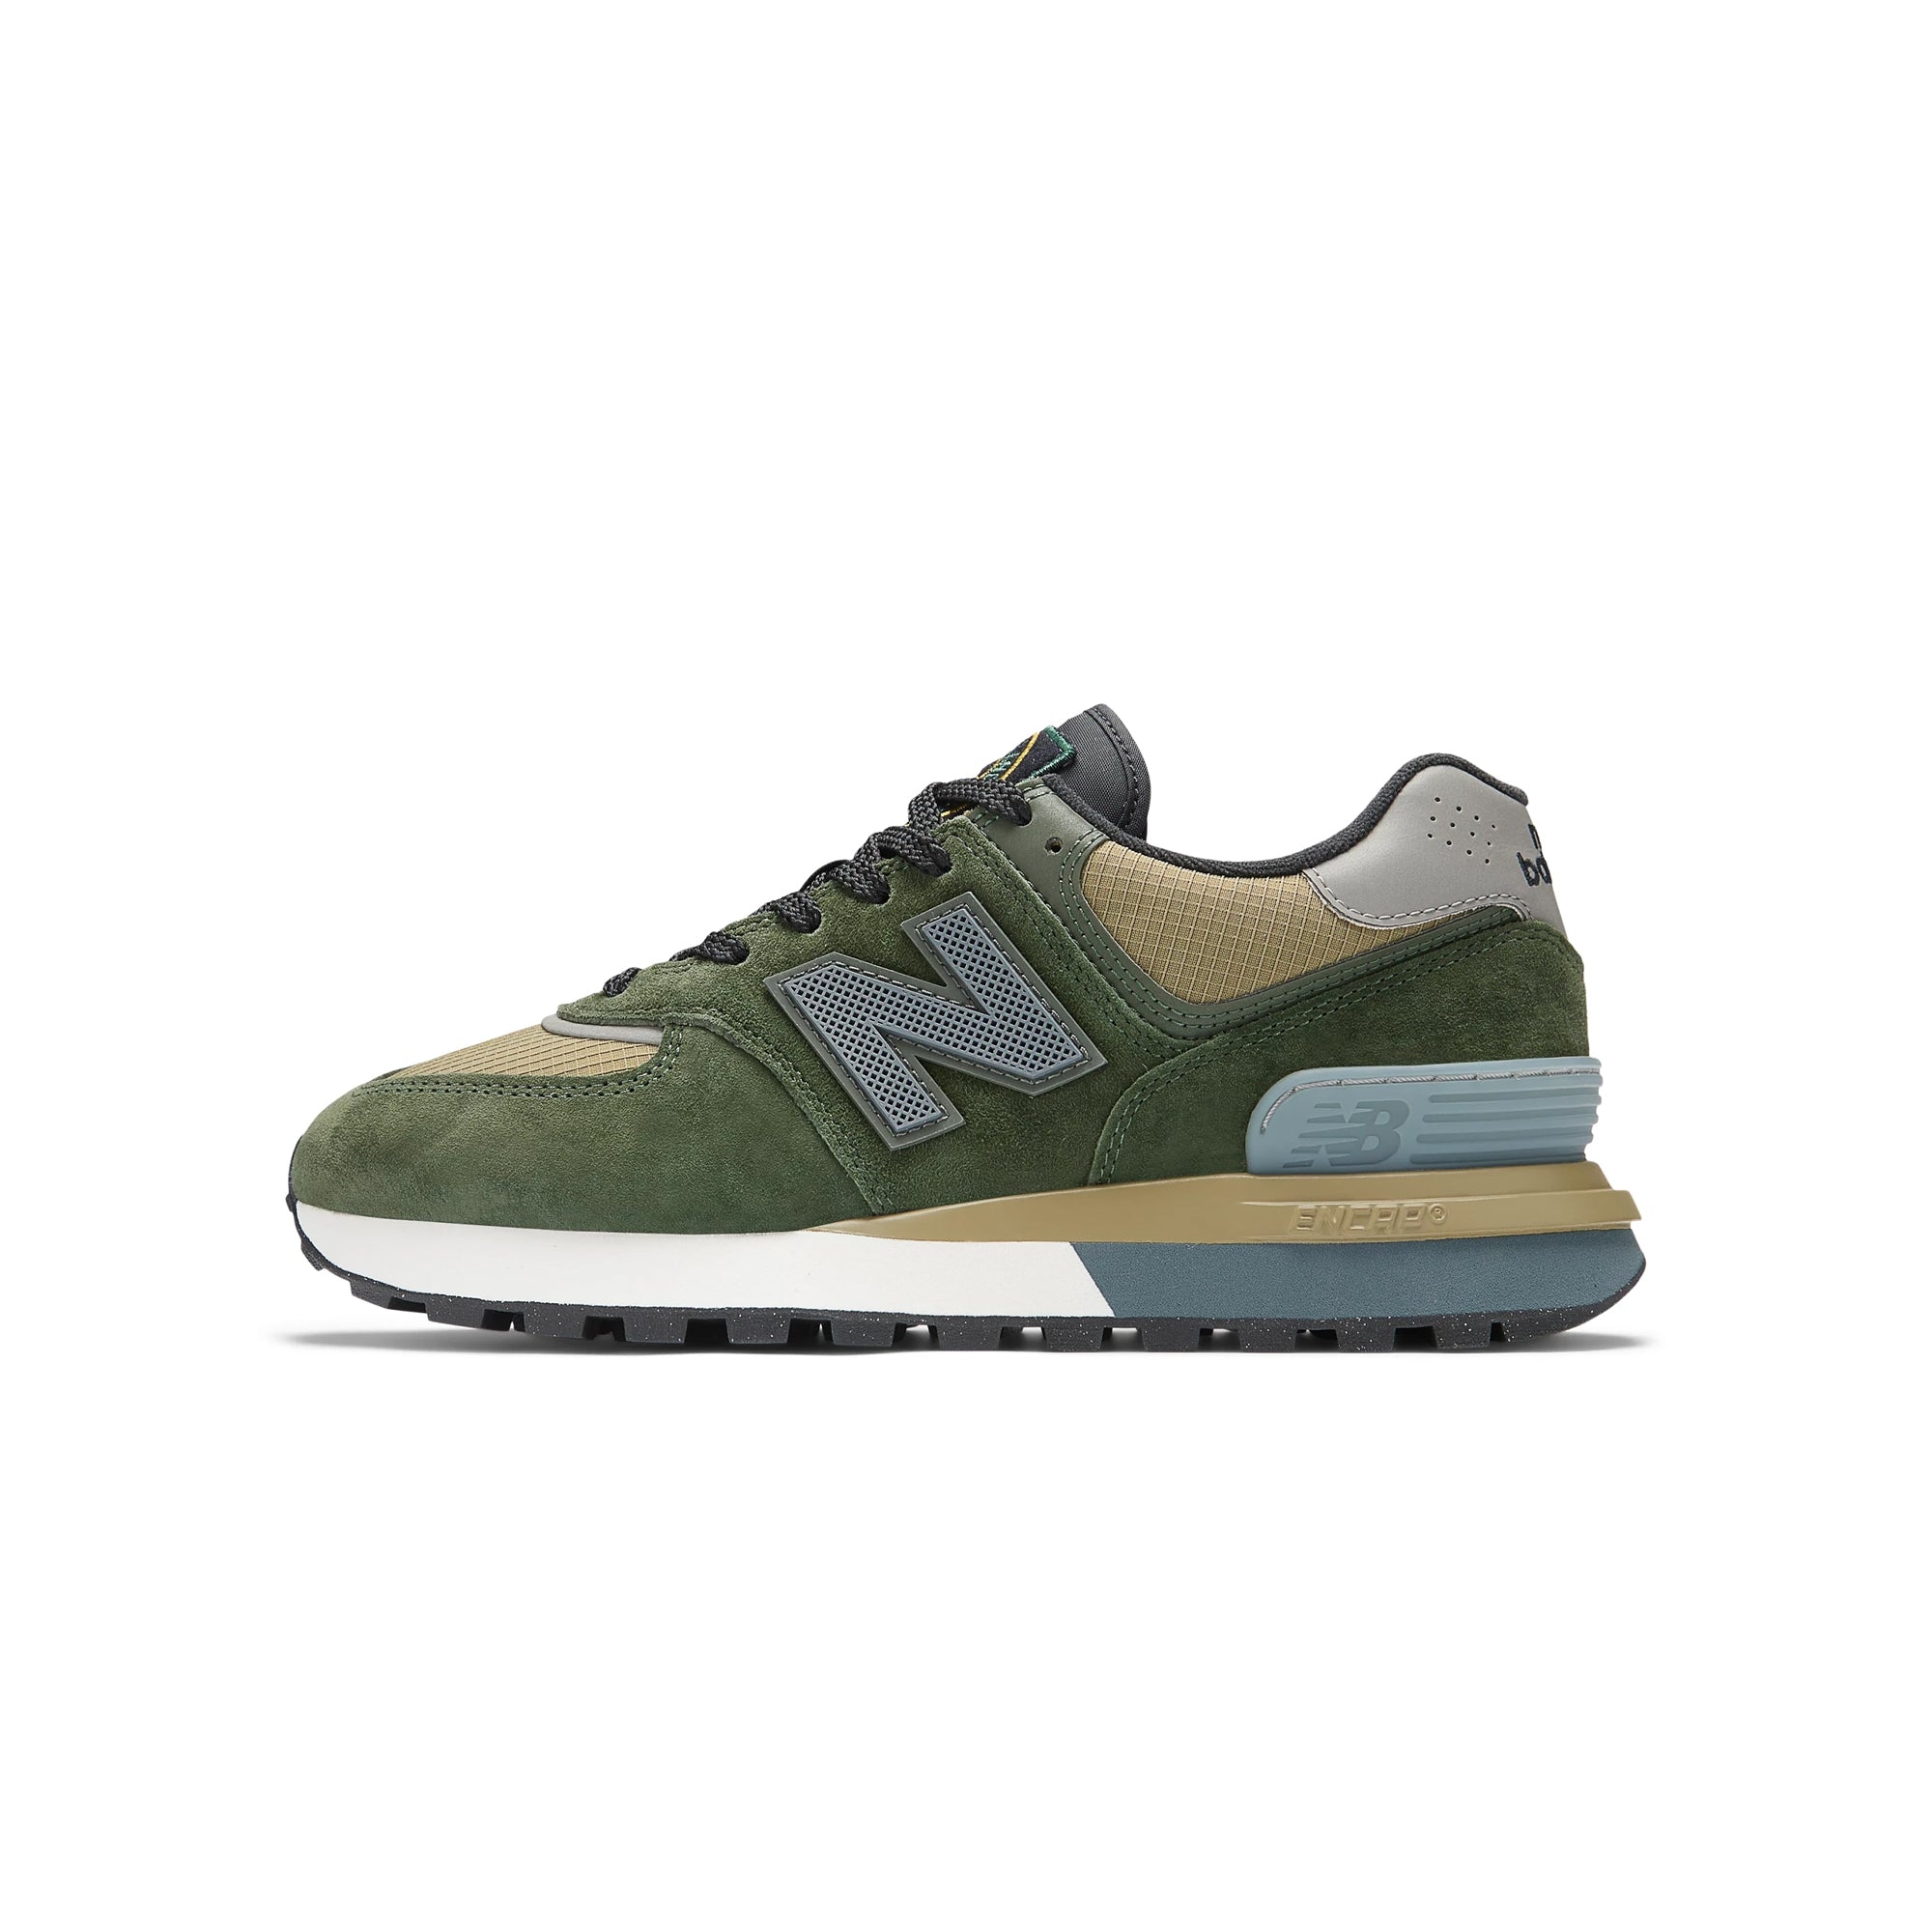 Stone Island x New Balance 574 Legacy Shoes – Extra Butter